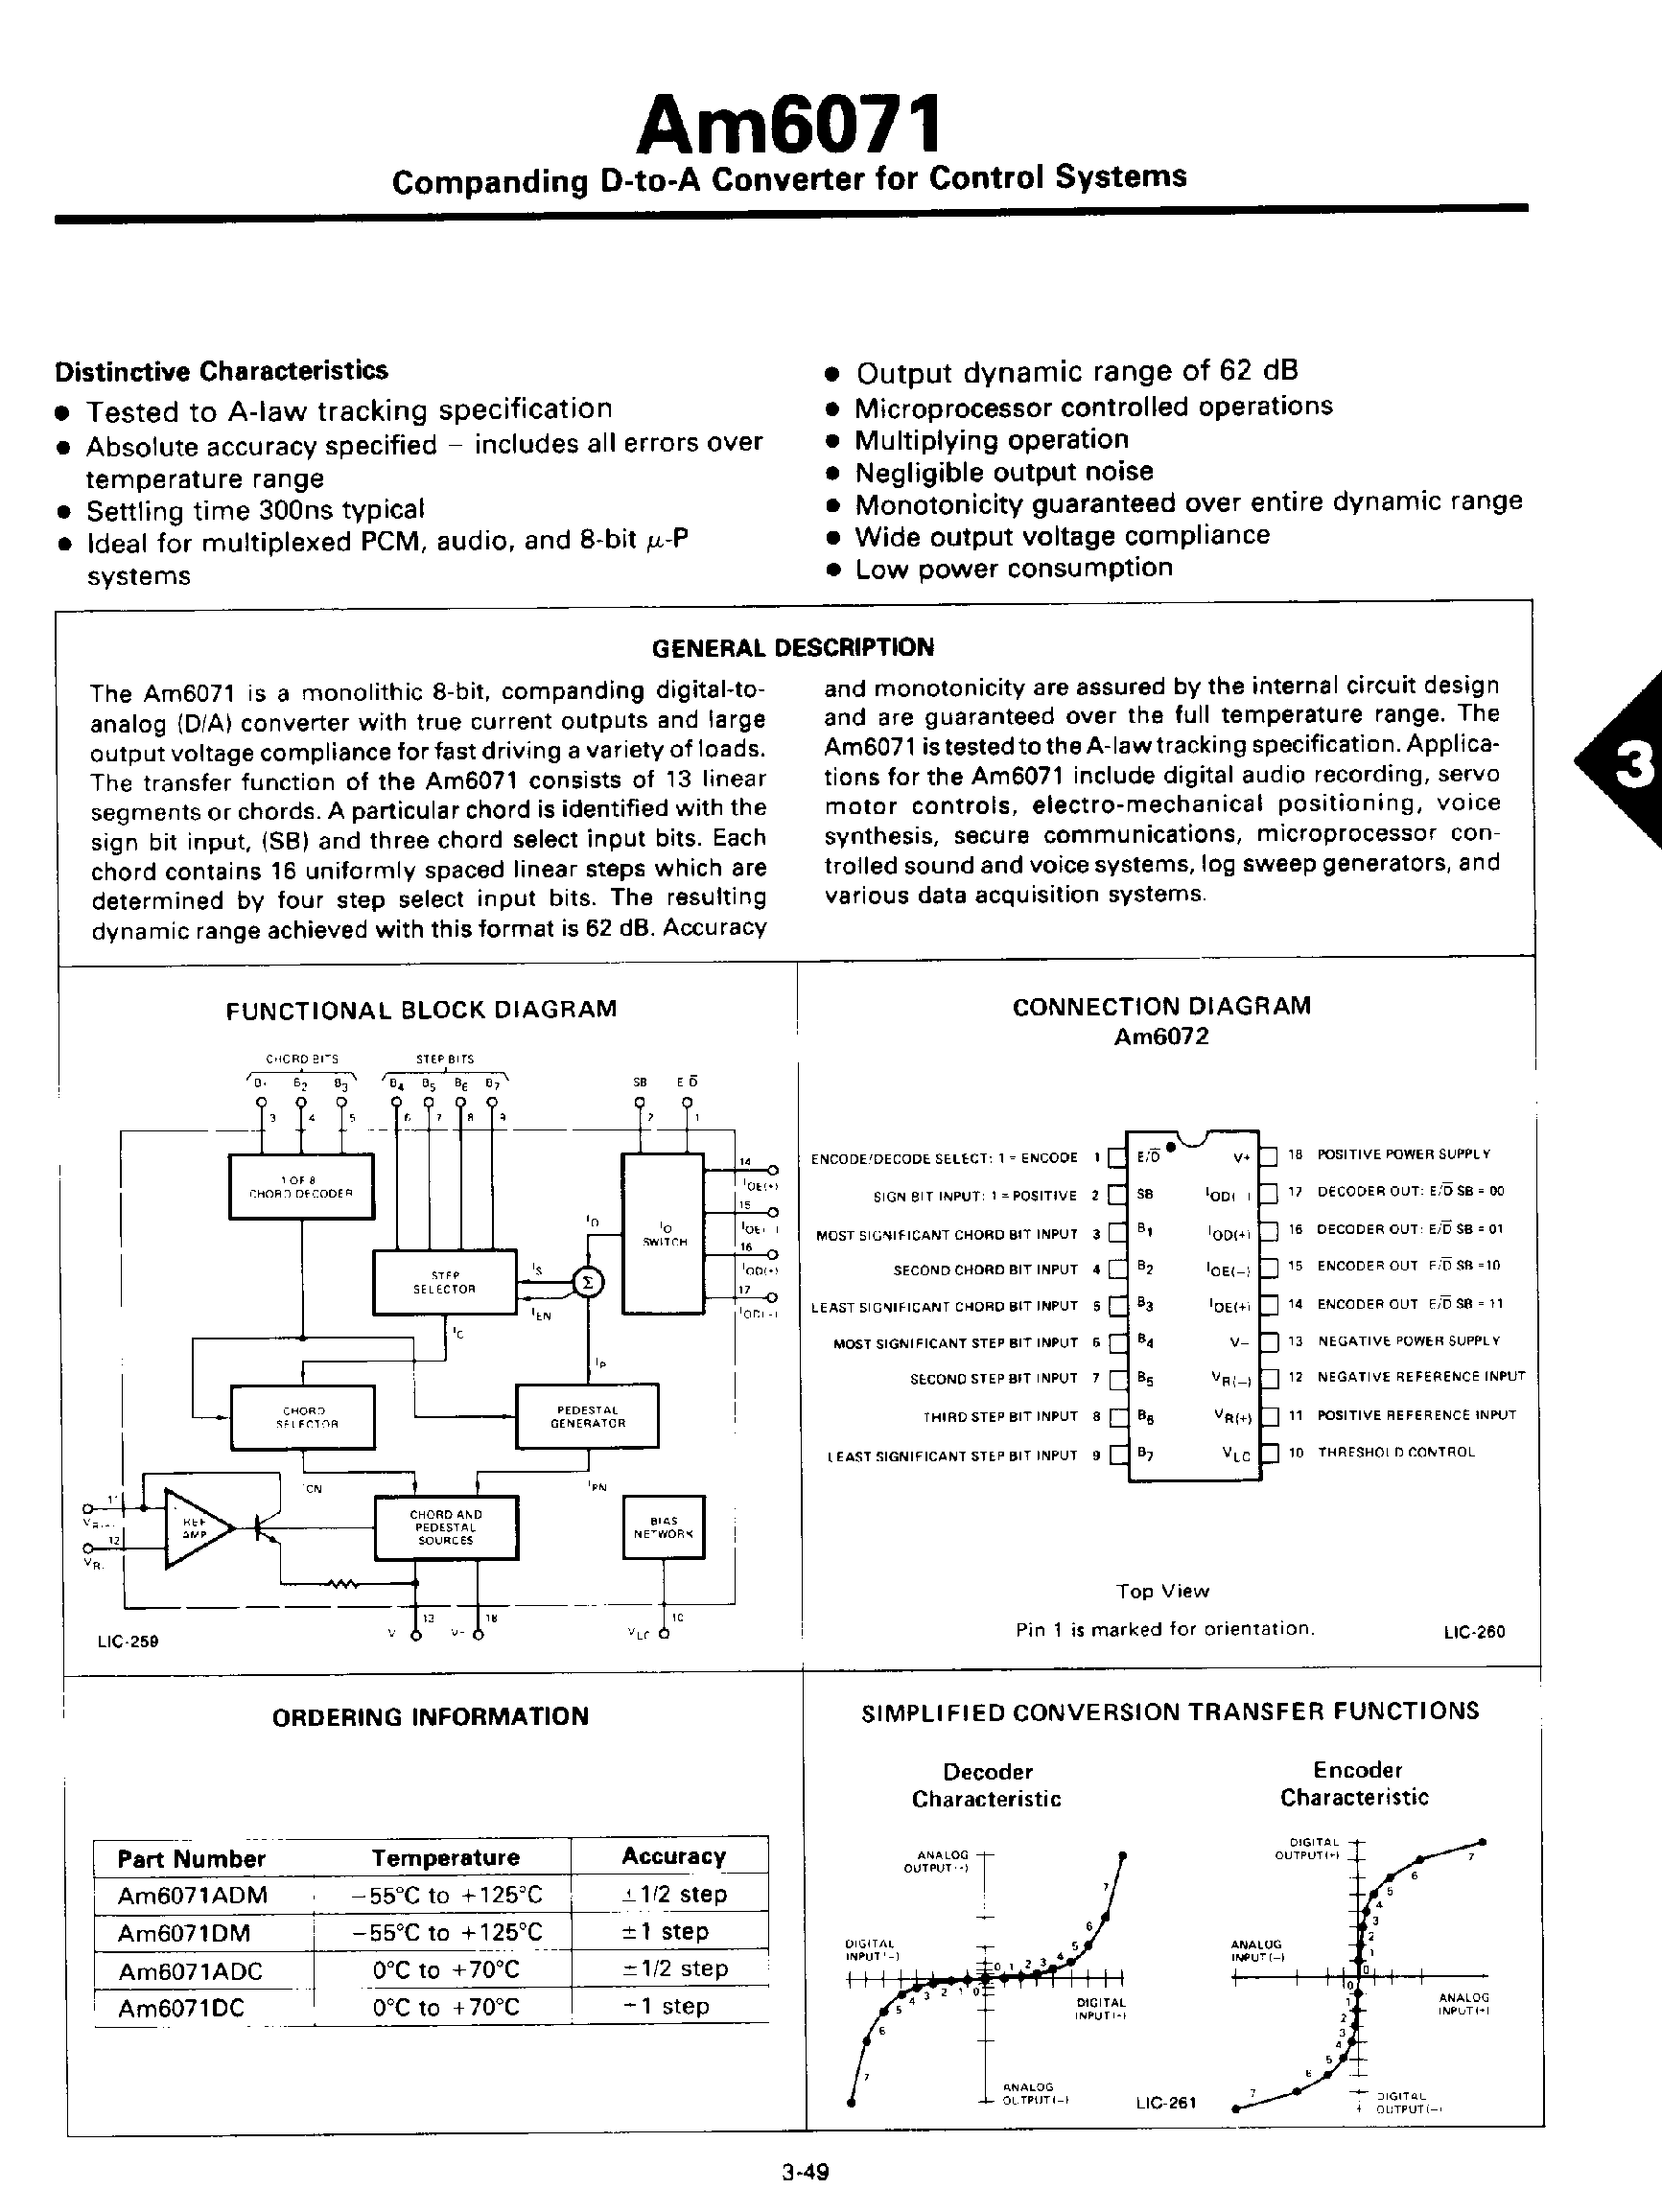 Datasheet AM6071 - Companding D-to-A Converter for Control System page 1